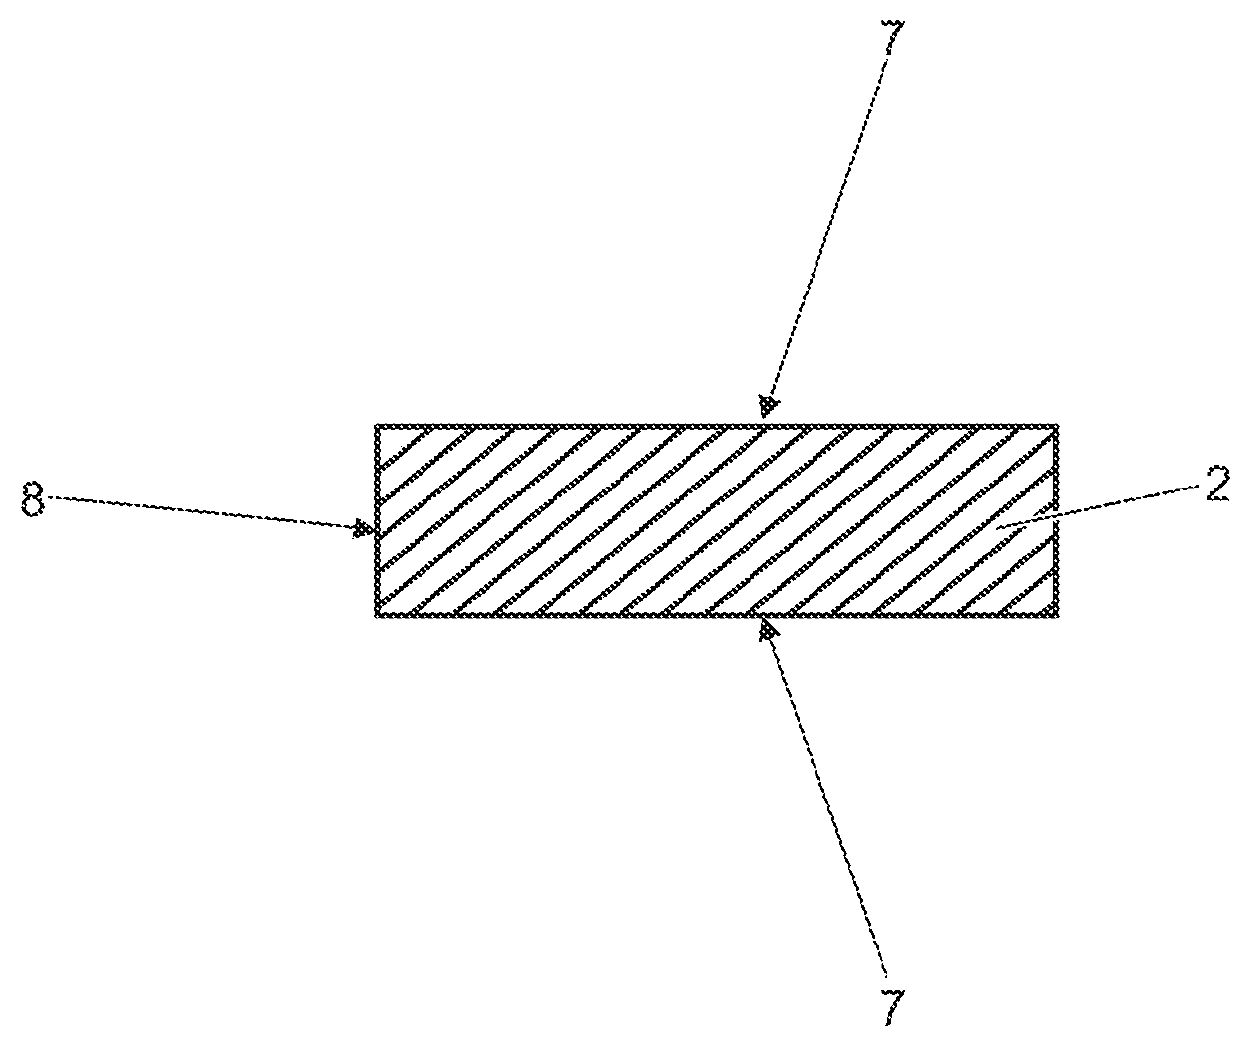 Stamped resistive element for use in electrical equipment, manufacturing process of stamped resistive element and apparatus equipped with stamped resistive element